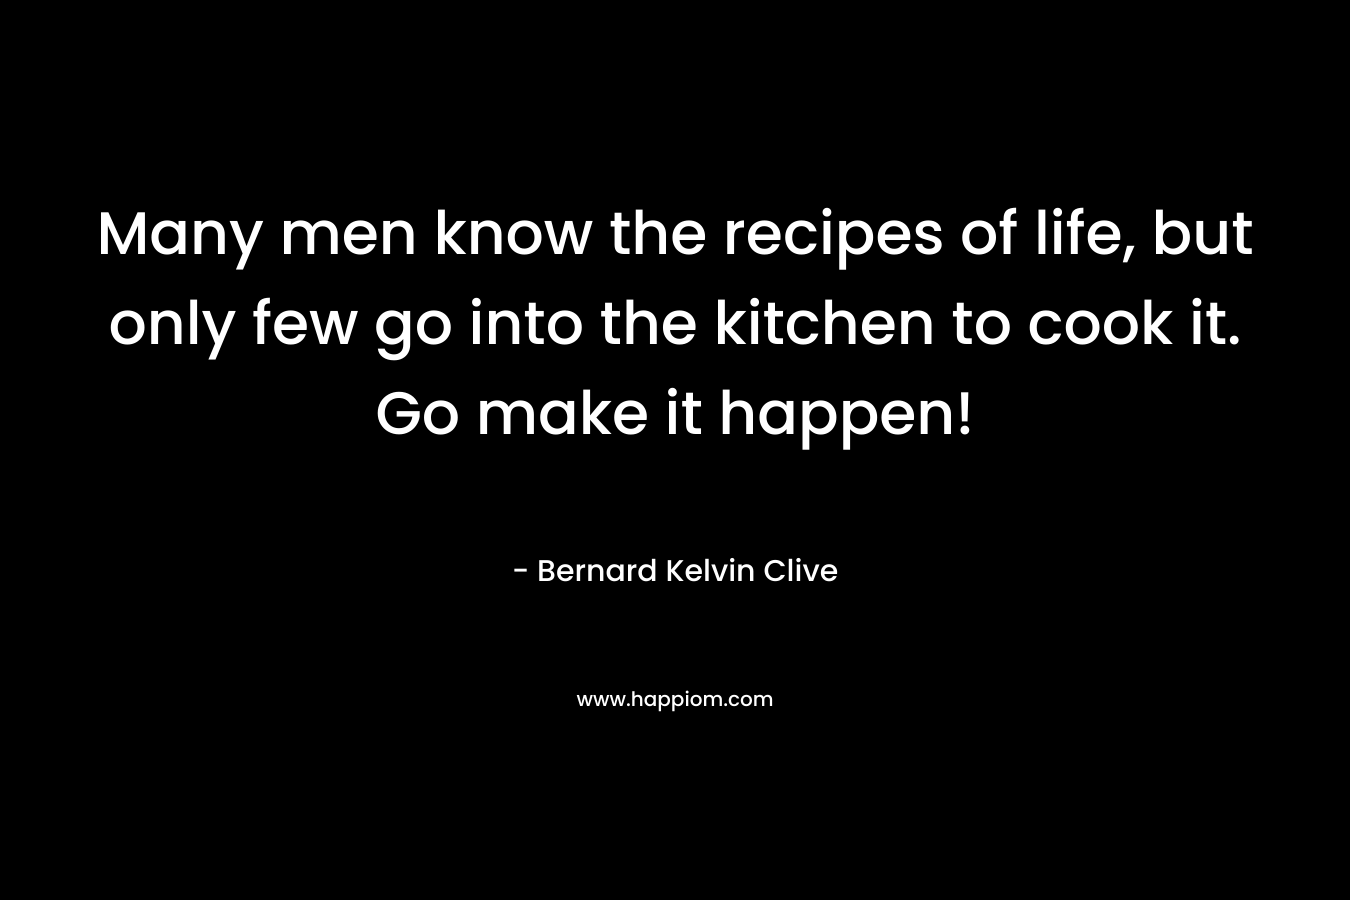 Many men know the recipes of life, but only few go into the kitchen to cook it. Go make it happen!